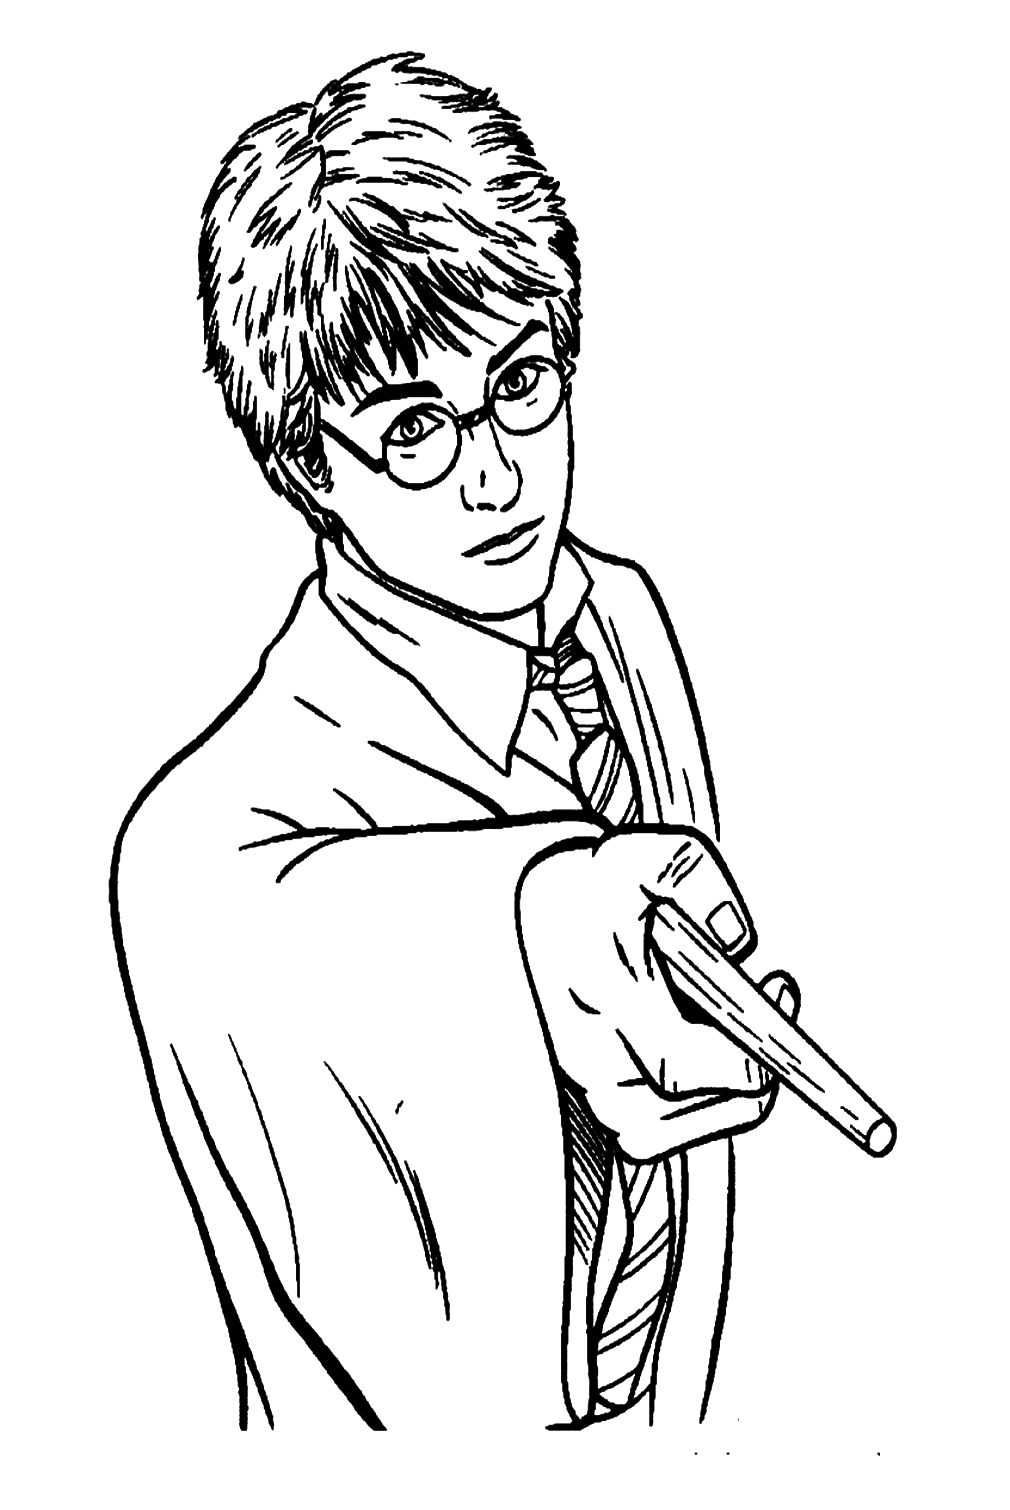 Harry Potter Holding Magic Wand 1 Coloring Pages